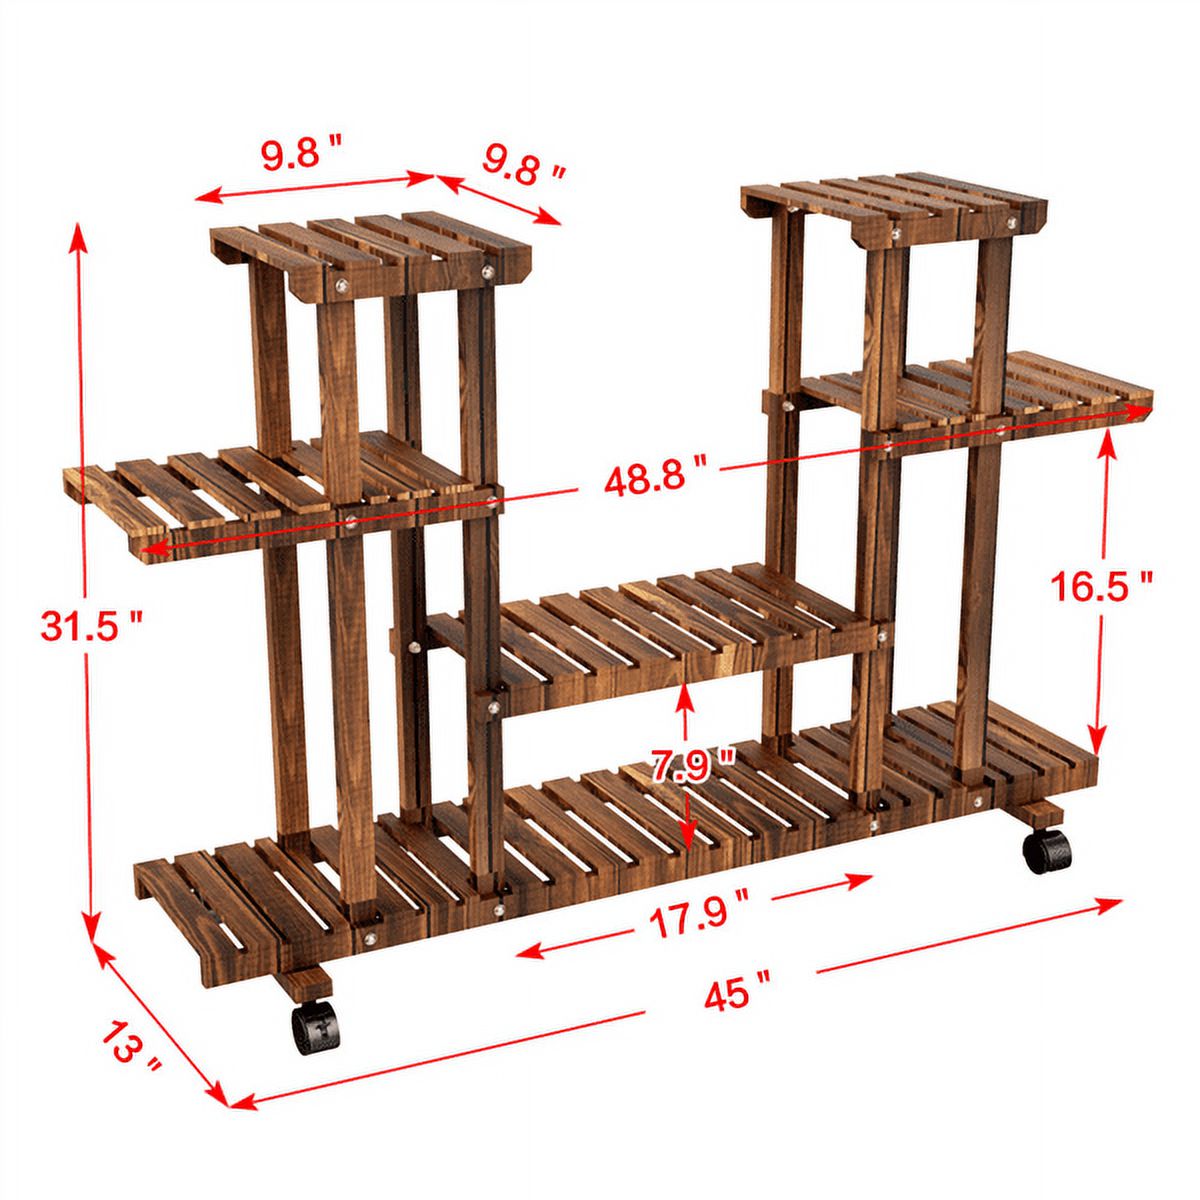 SmileMart 4-Tier 6-Shelf Rolling Wooden Flower Display Stand for Indoors or Outdoors - image 3 of 6